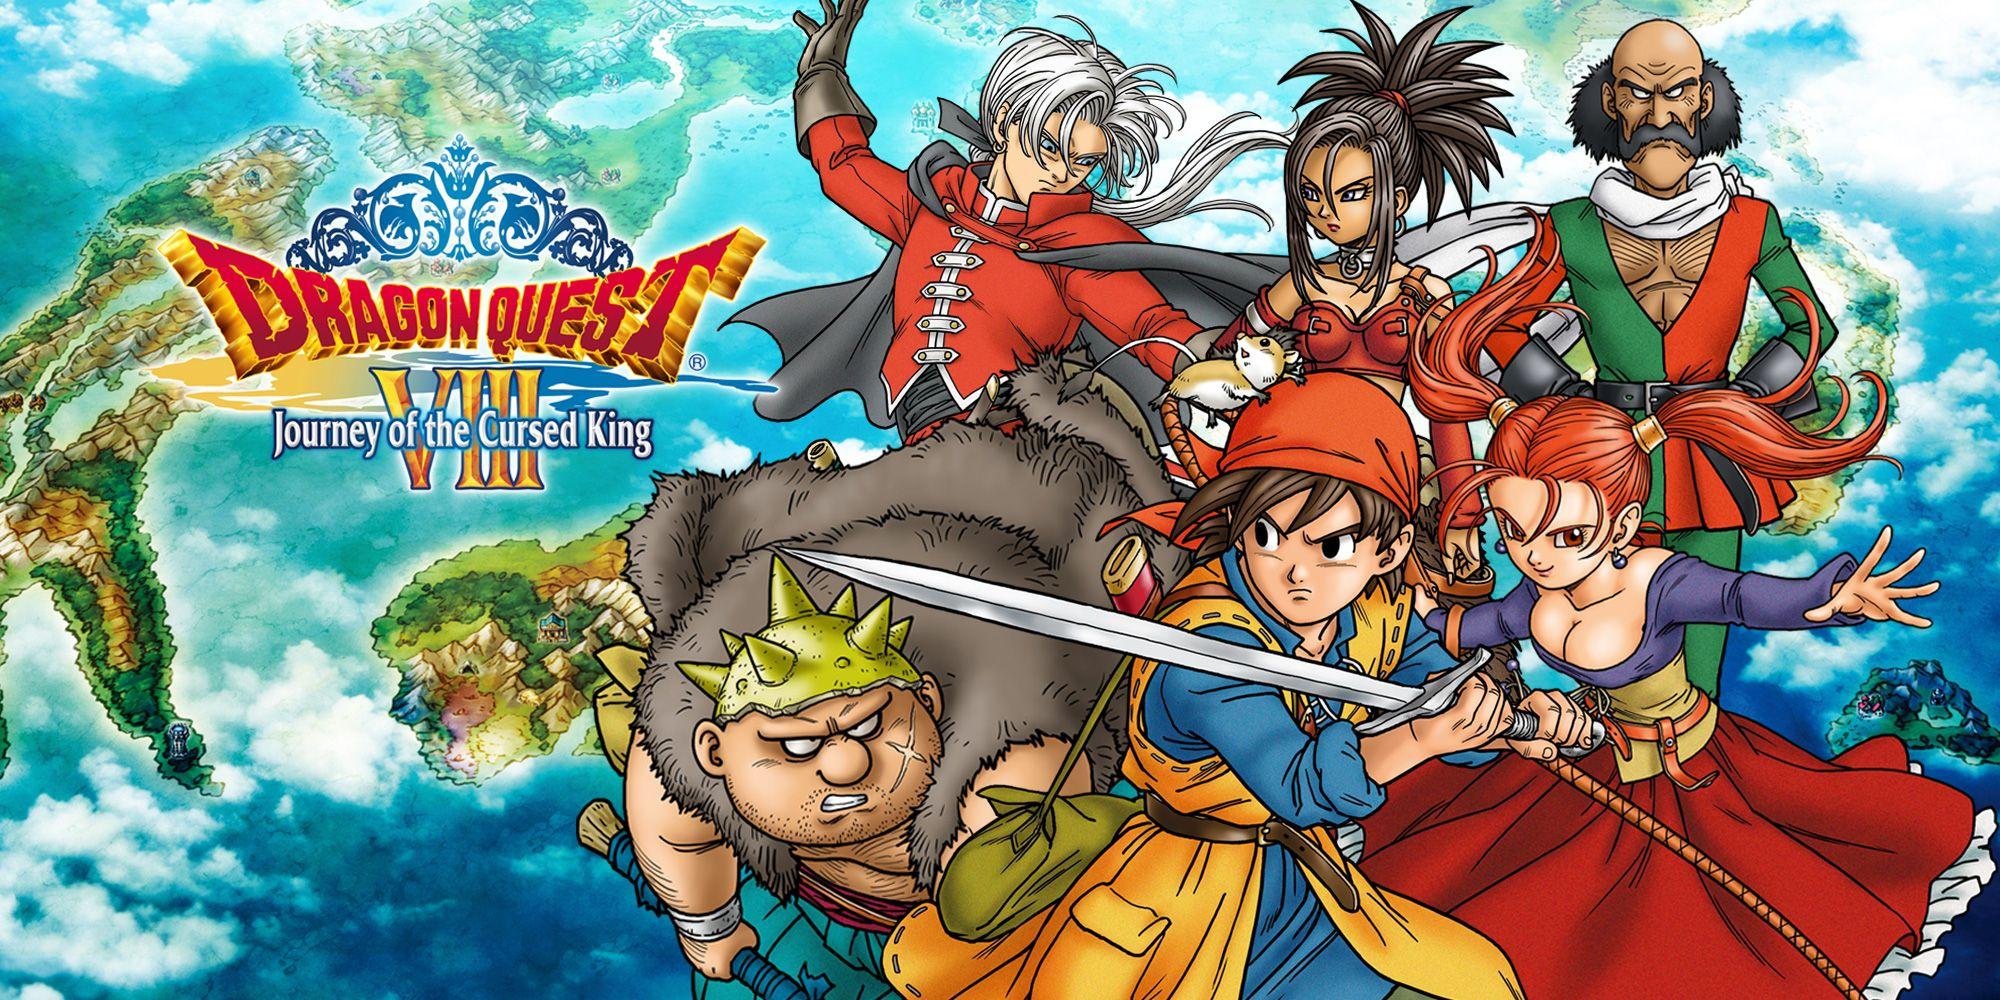 Dragon Quest 8 Wallpapers Top Free Dragon Quest 8 Backgrounds Wallpaperaccess